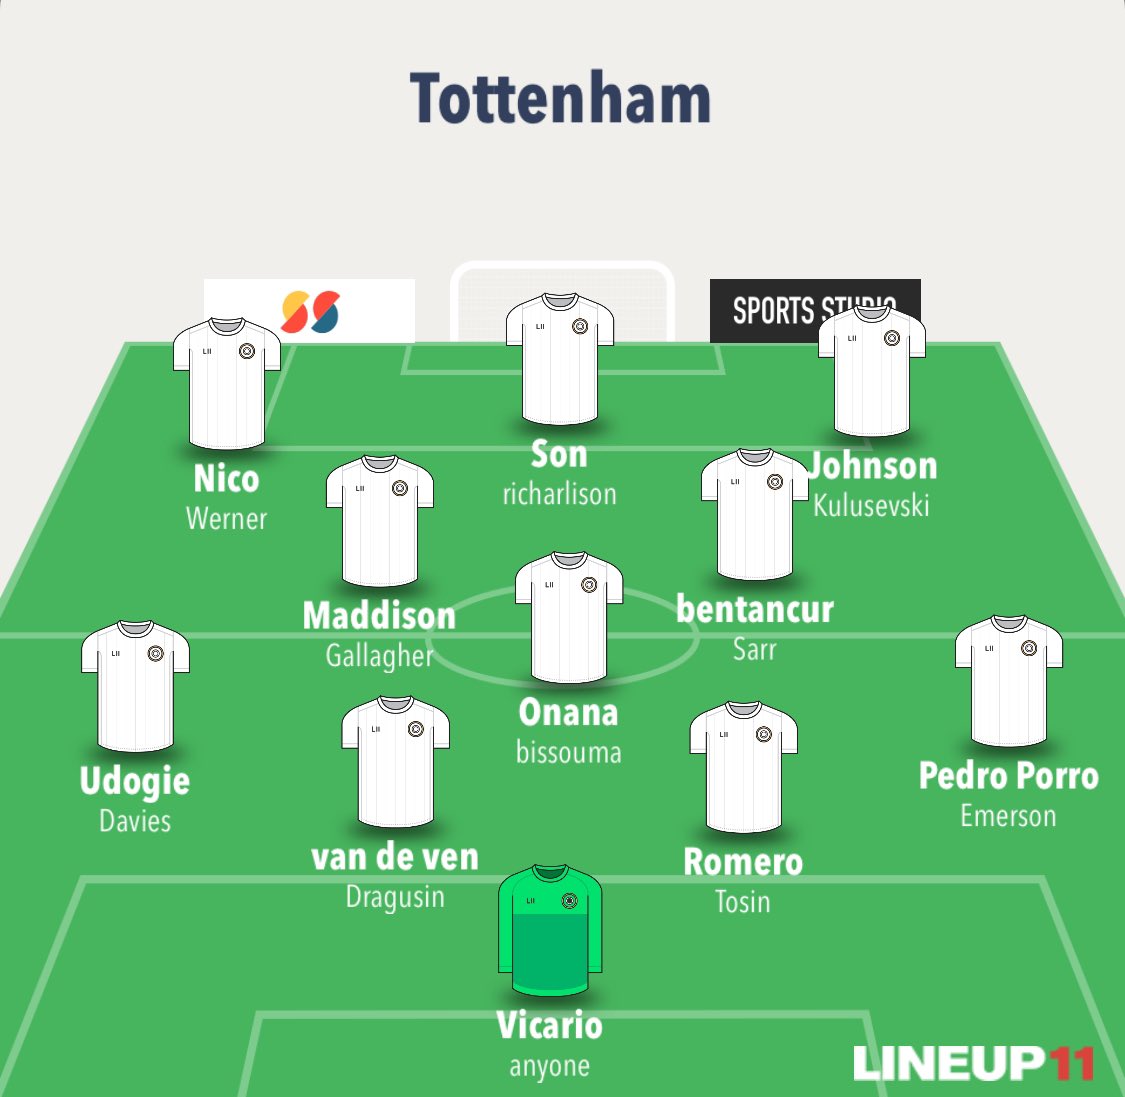 Thoughts on this team for next season?